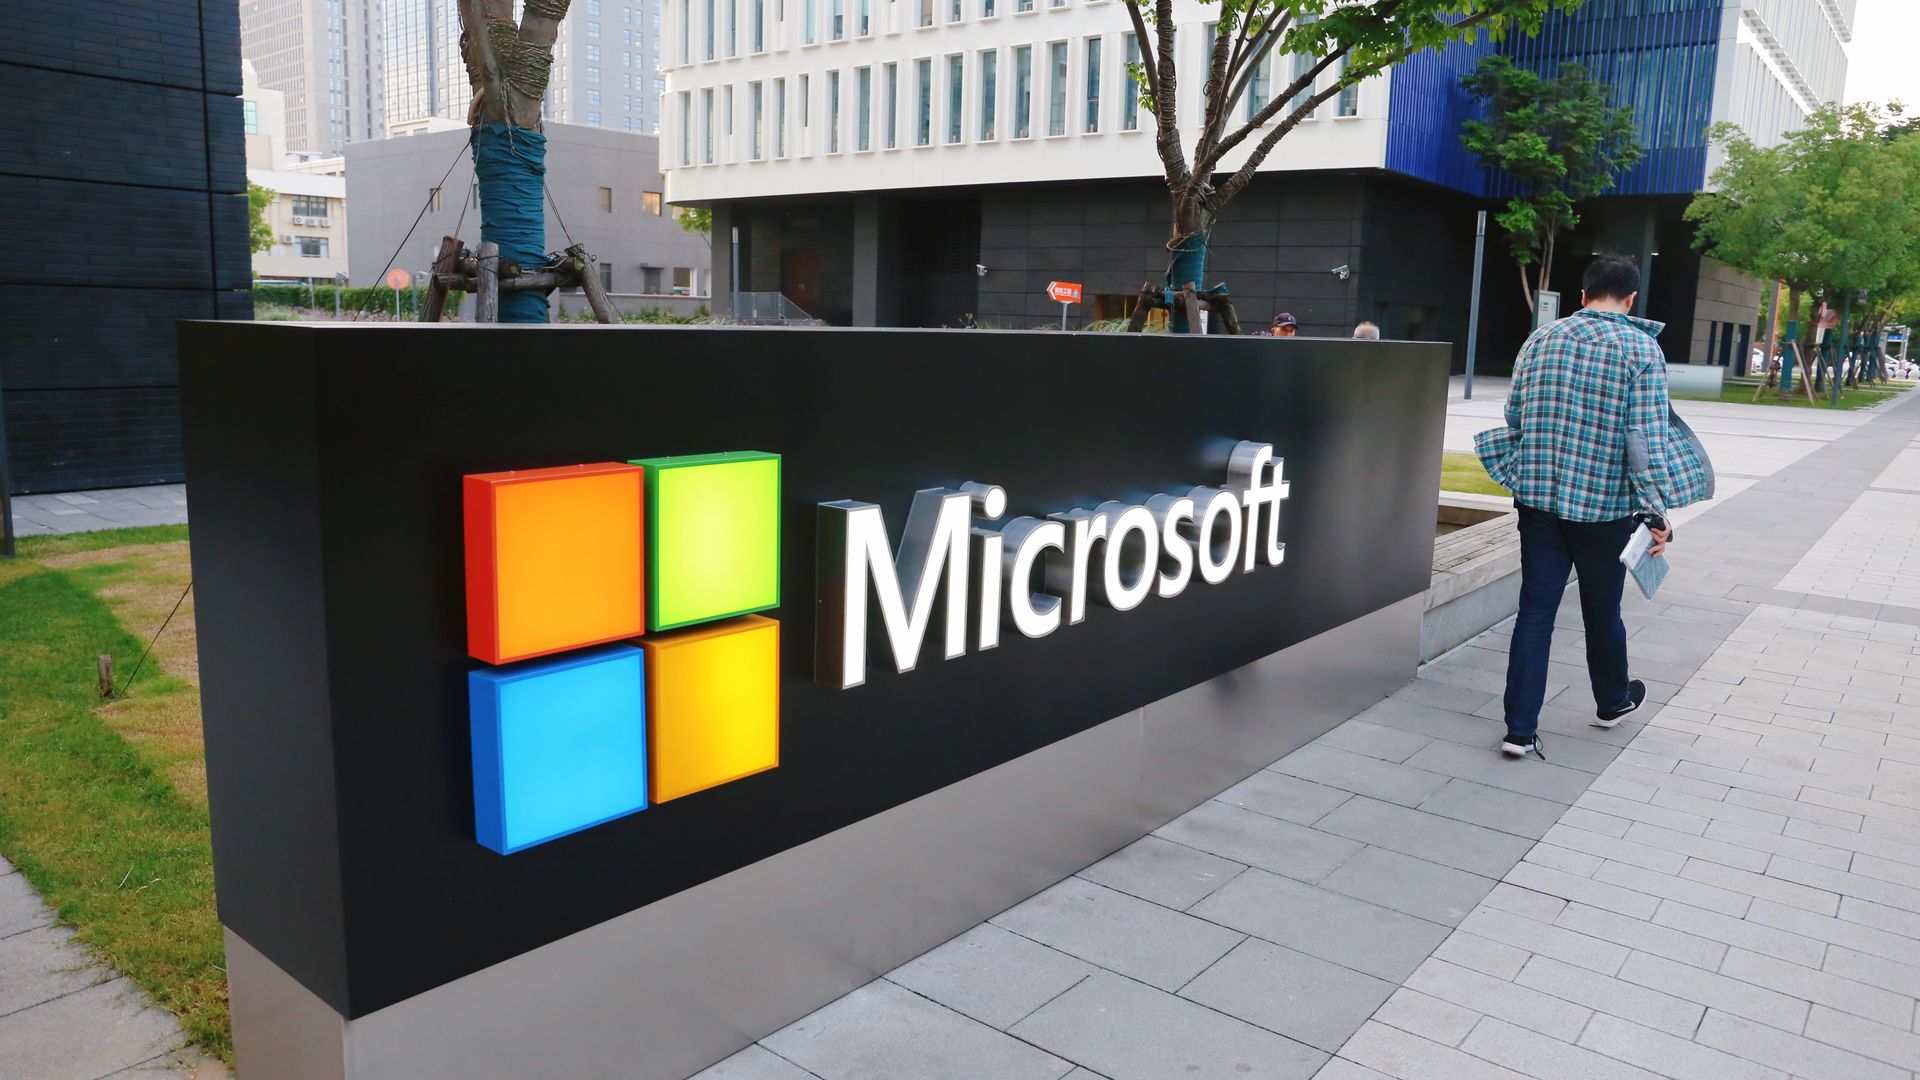 A man walks past a Microsoft sign outside an office building in Shanghai, China.